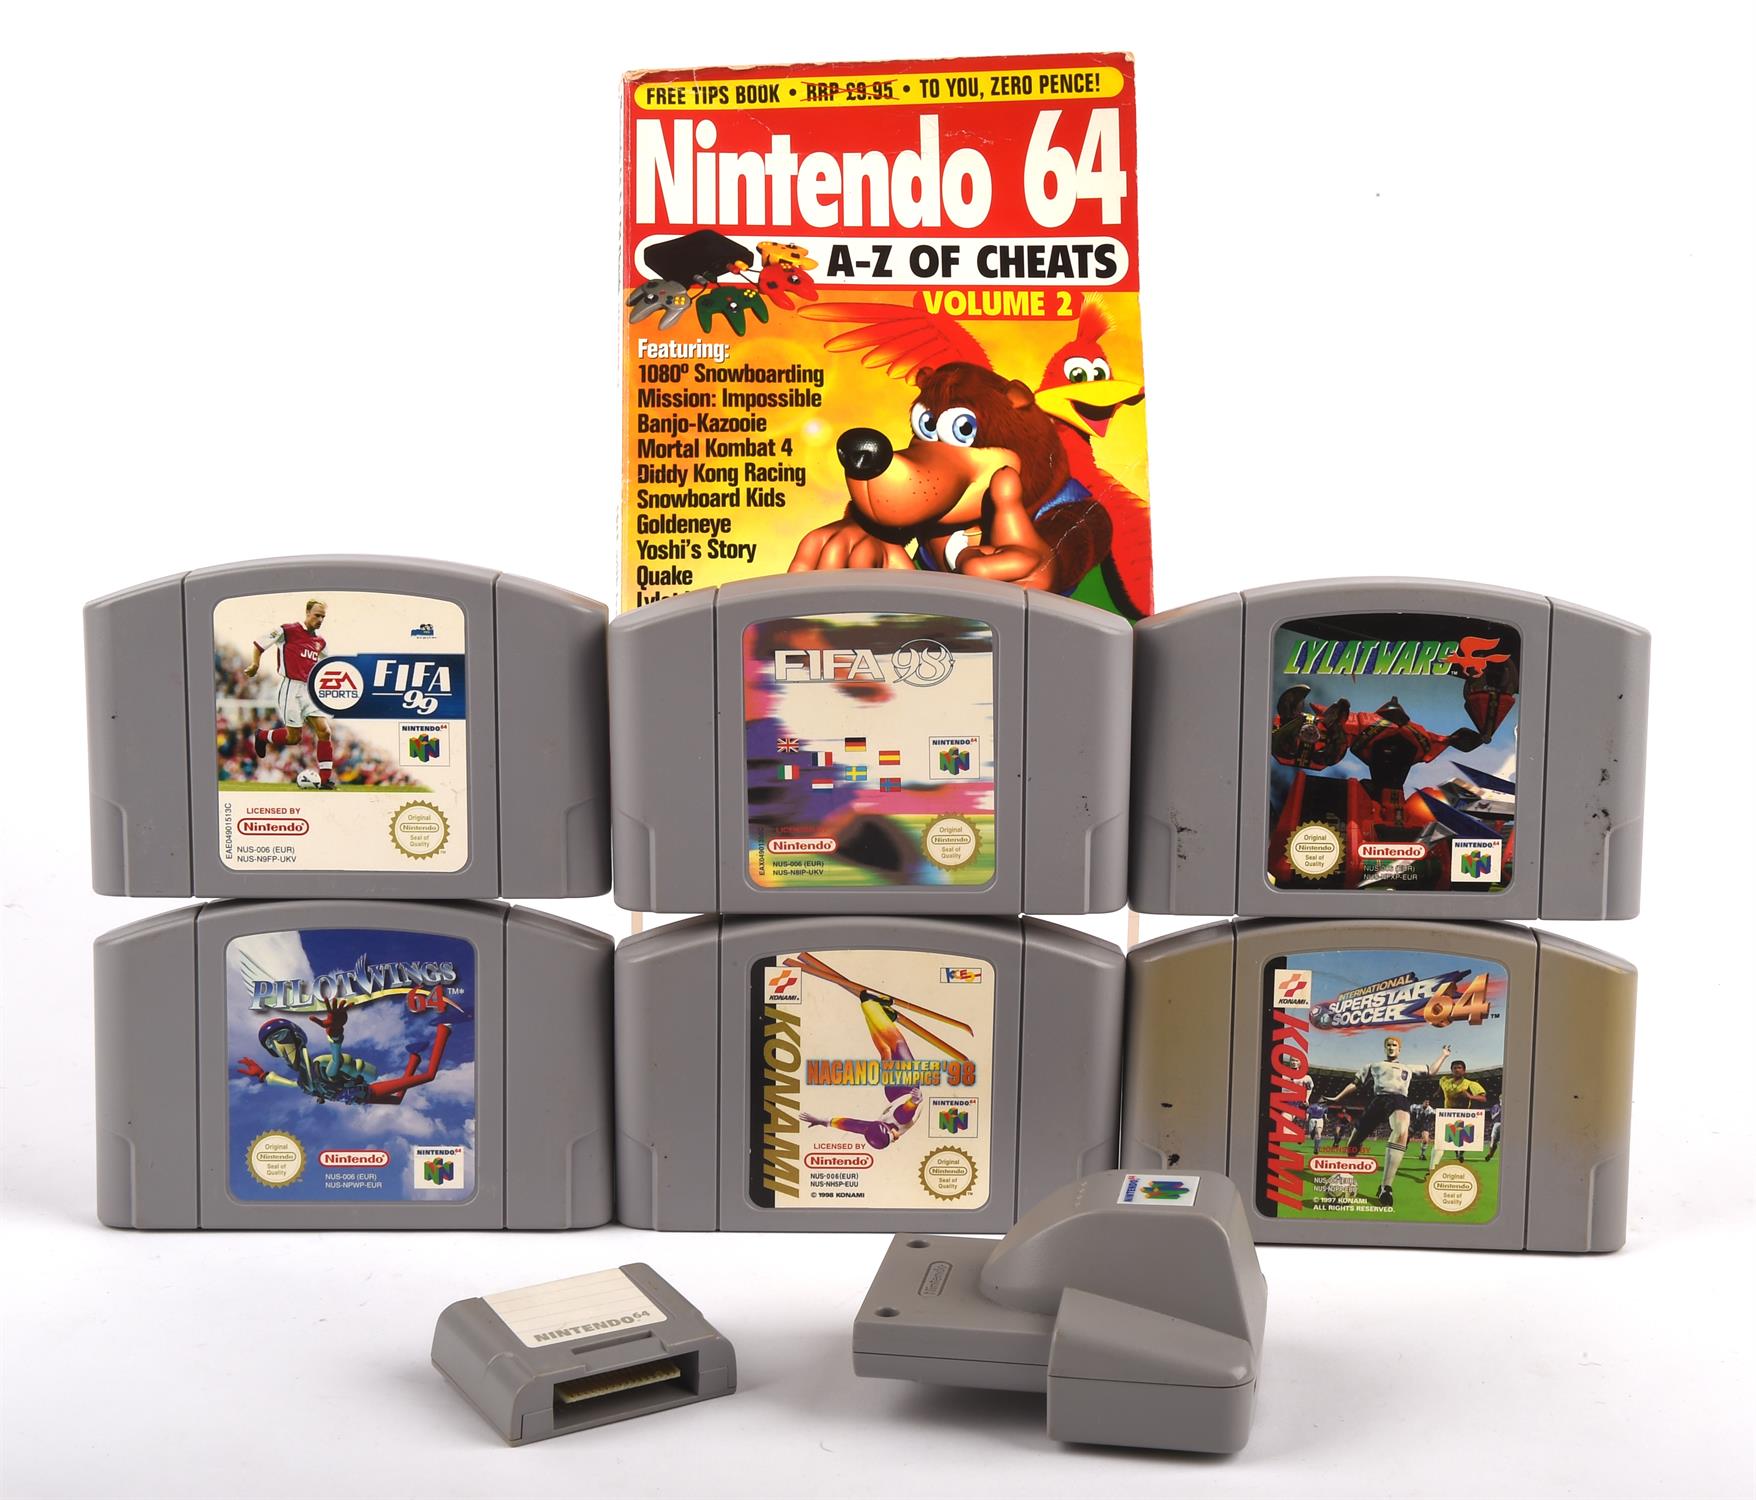 Nintendo 64 (N64) loose cart bundle of 6 games (PAL) + A-Z of Cheats Volume 2 book and Rumble